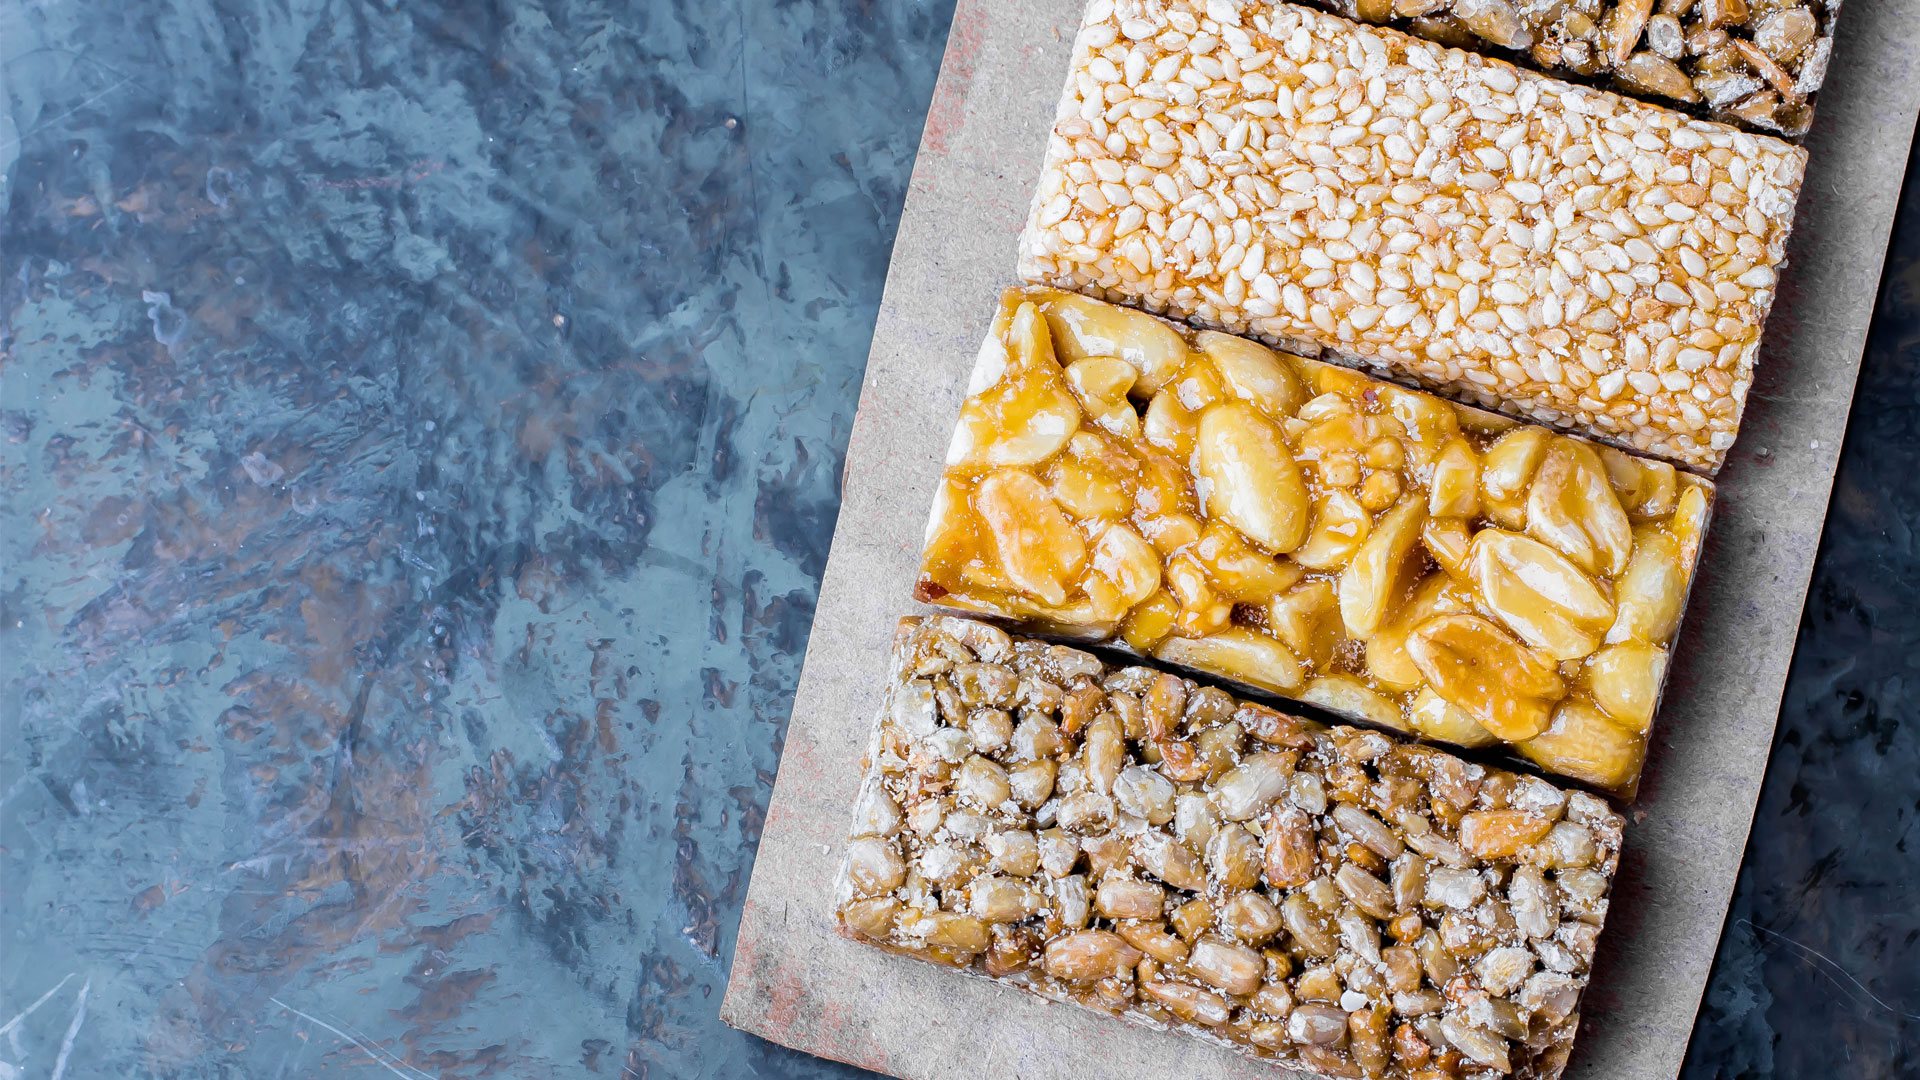 Not-so-healthy "health" bars contain lots of added sugars. 